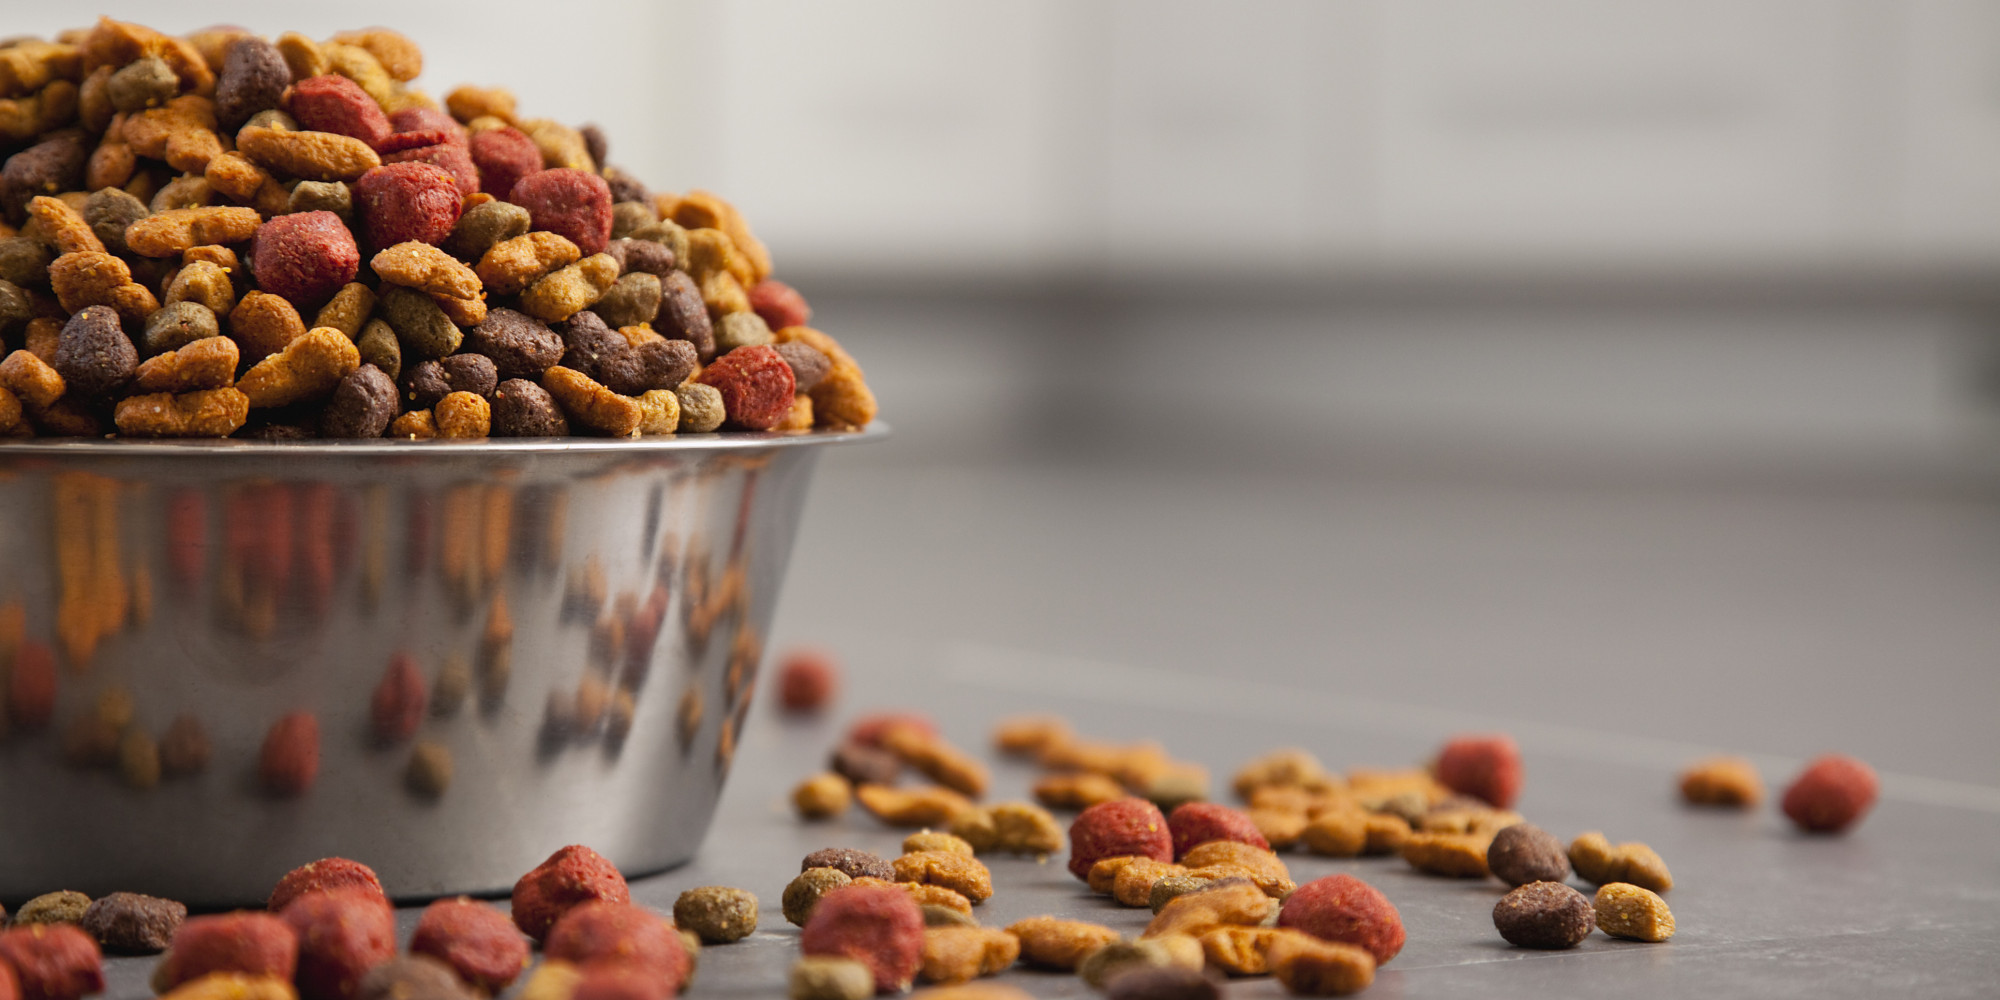 Saudi Arabia Pet Food Market 2019 - Industry Insights By Growth, Emerging Trends And Forecast By 2024